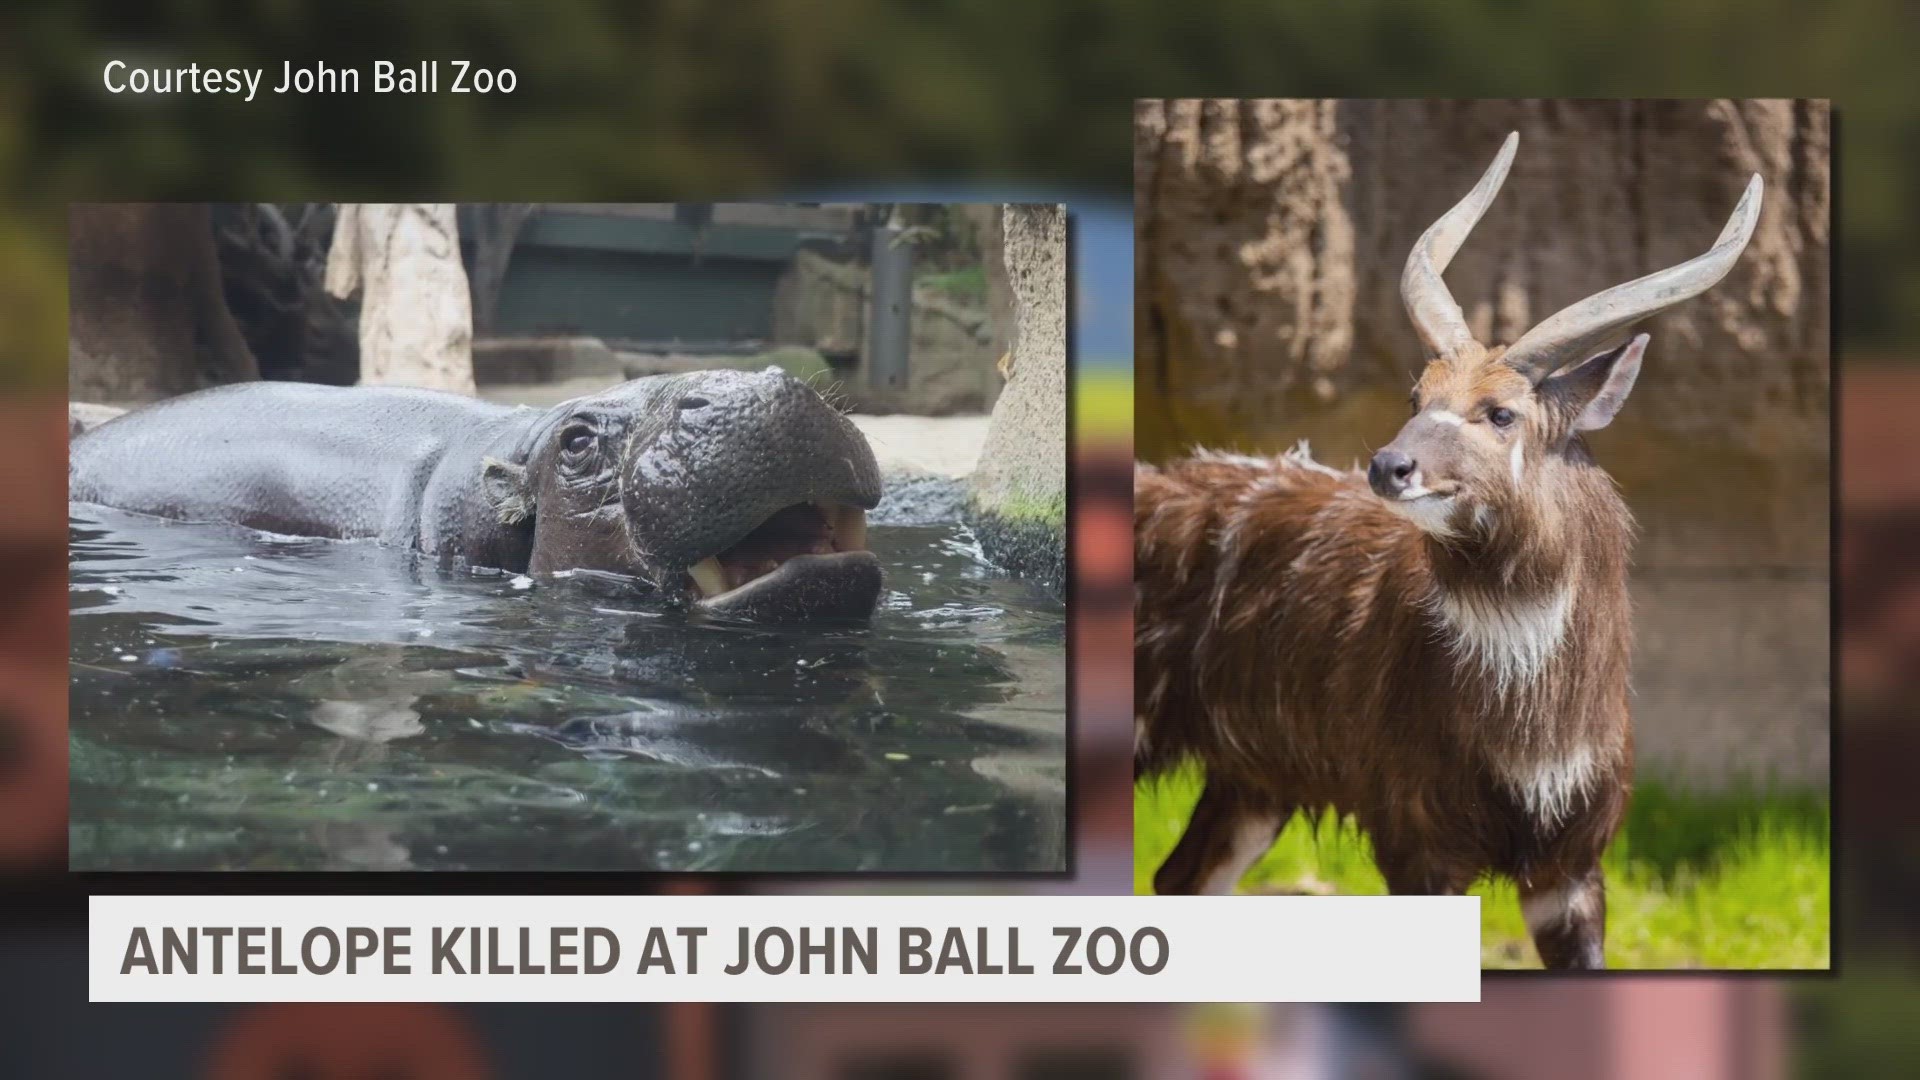 The sitatunga who was killed, named Chopper, was introduced to West Michigan on the Zoo's Facebook page just three days prior.